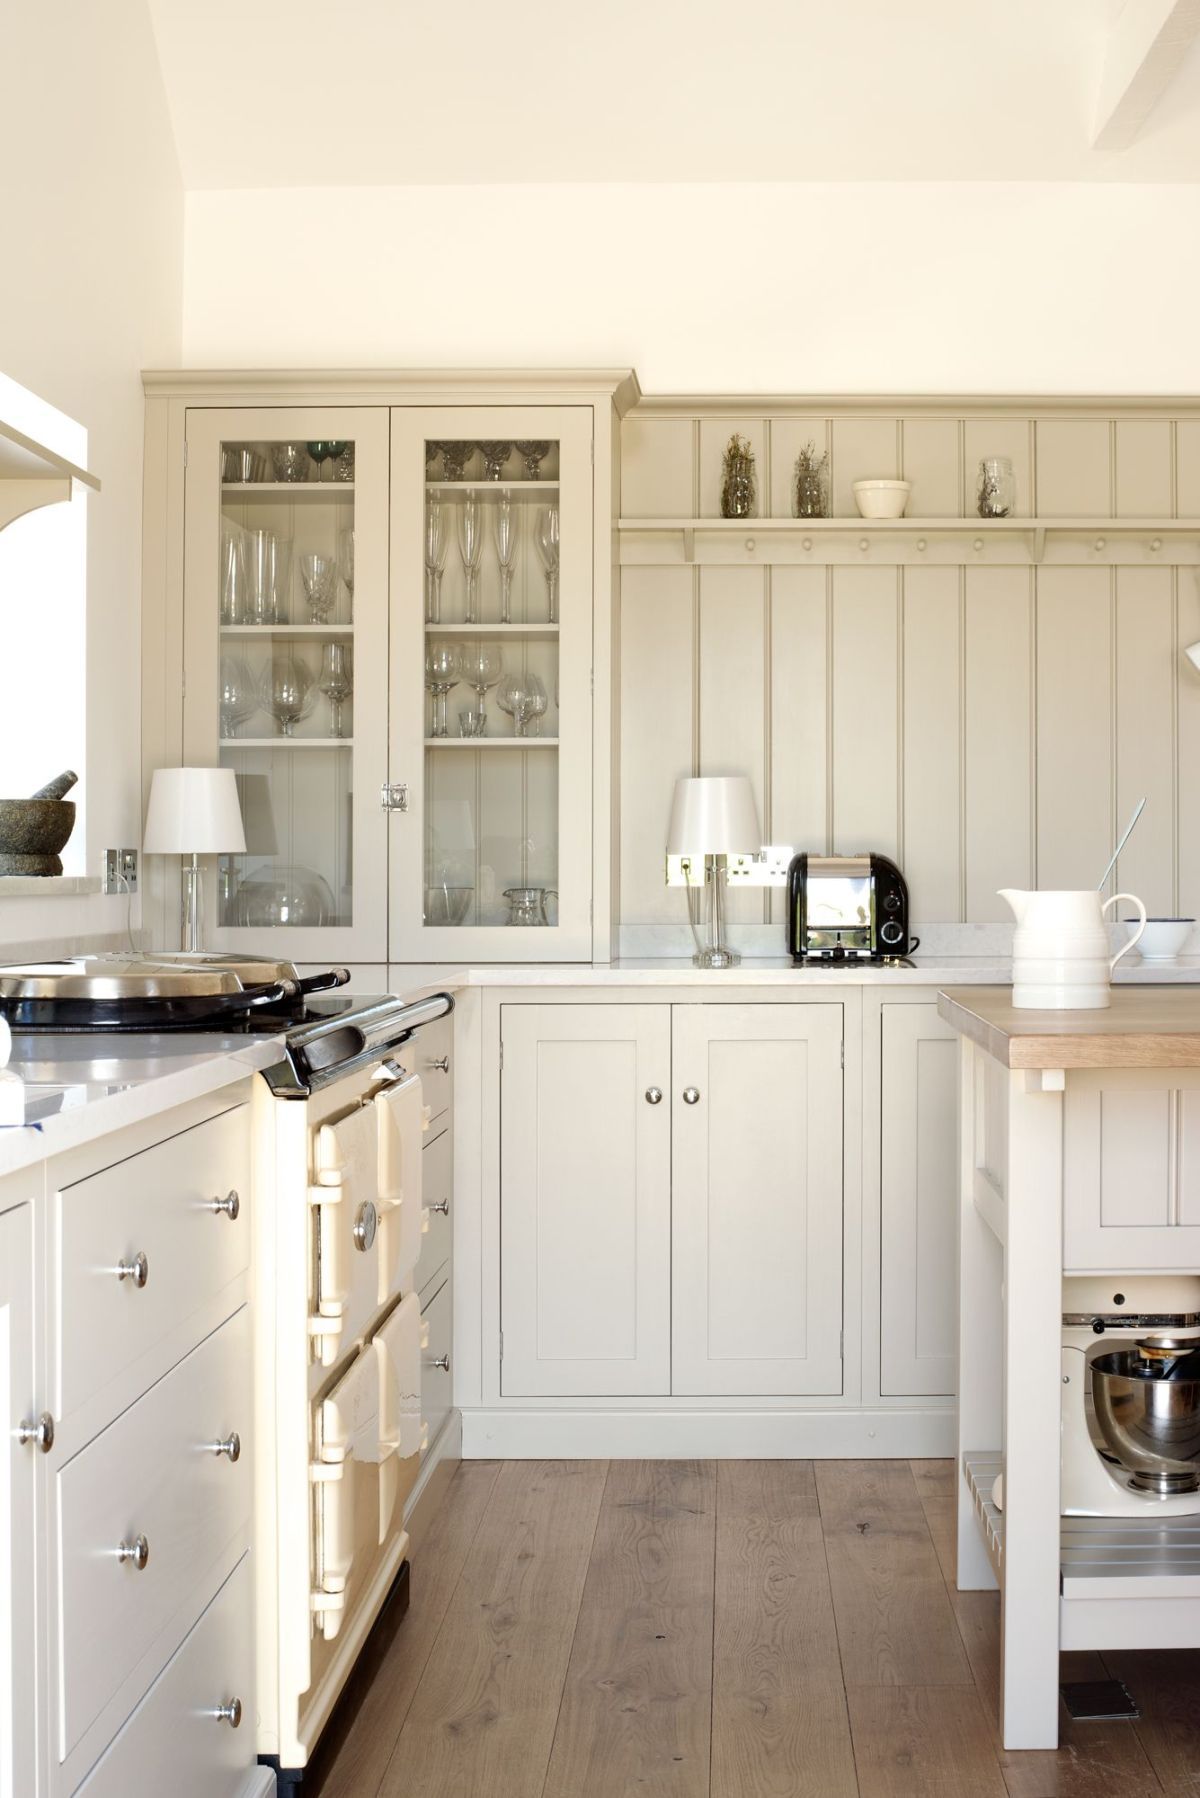 Cream Kitchens: The Best Thing For Your House